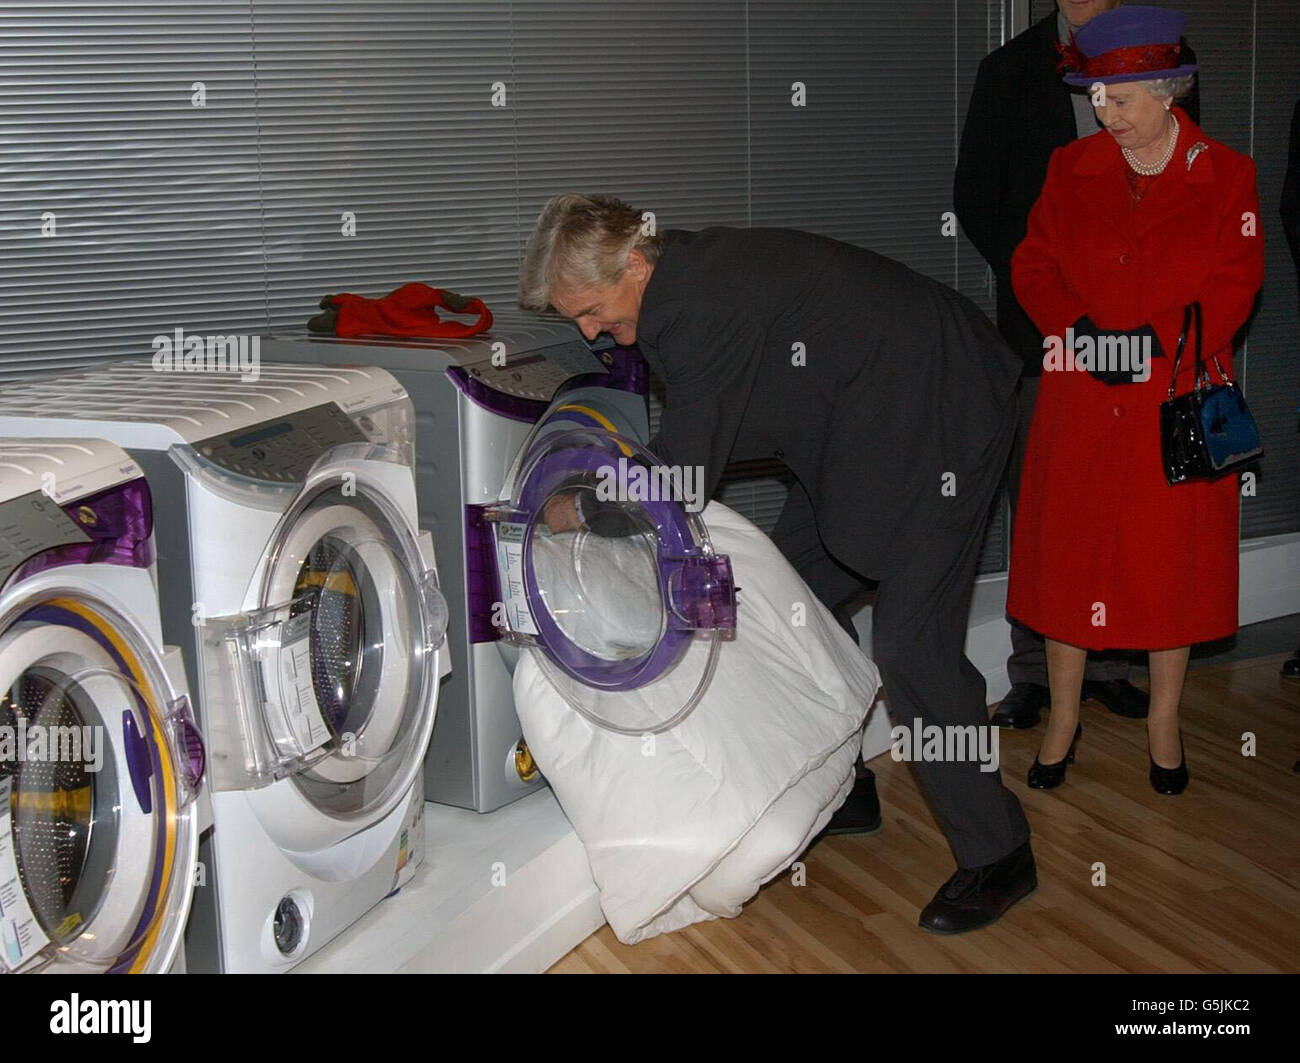 kål bund det tvivler jeg på The Queen and the Duke of Edinburgh watch James Dyson demonstrate his washing  machine at the domestic appliance maker's Malmesbury factory near  Chippenham in Wiltshire. * She travelled by scheduled train with